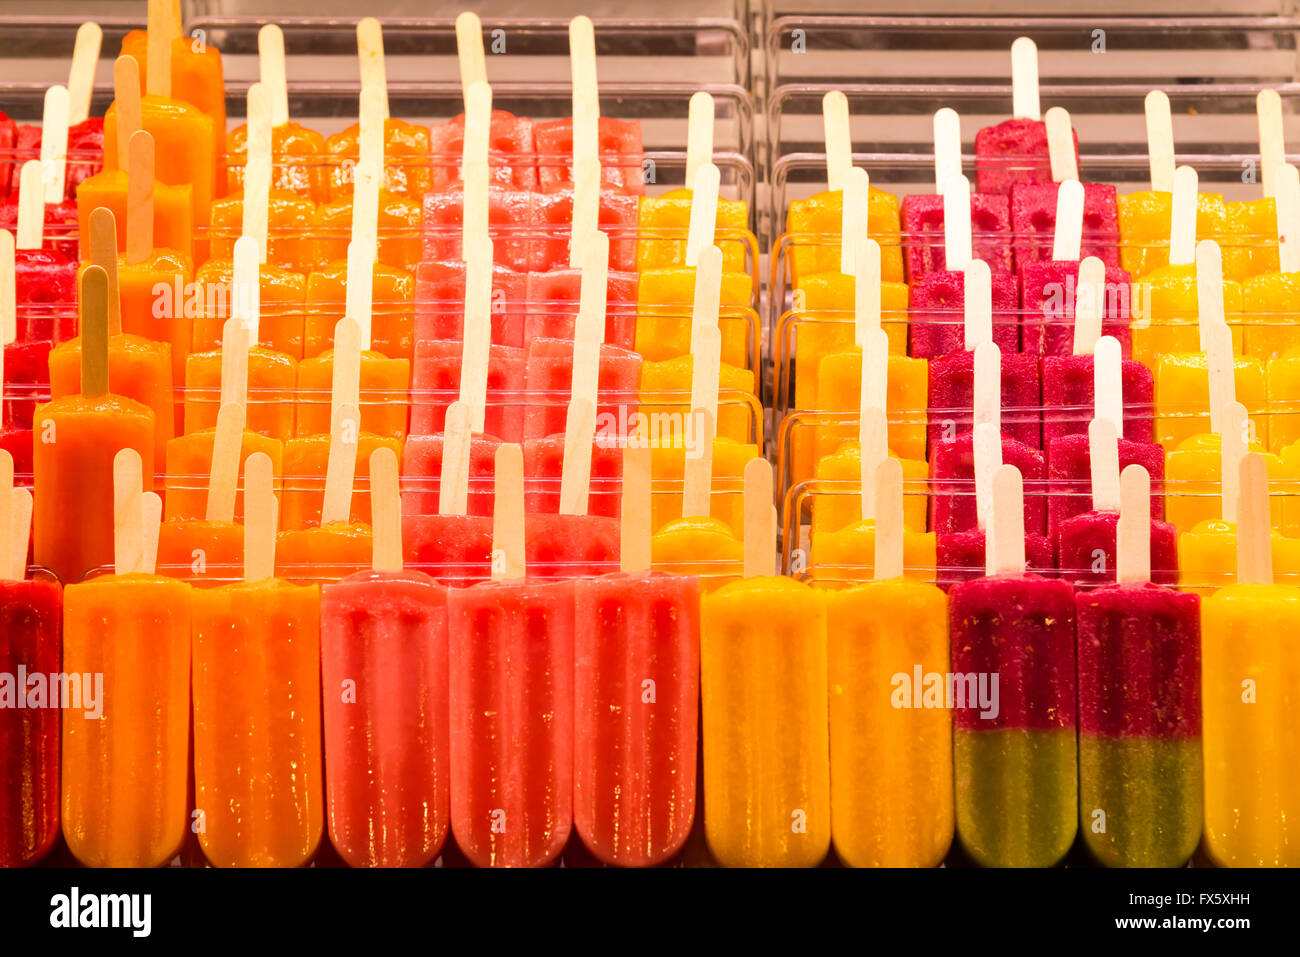 colorful ice cream popsicles on display Stock Photo